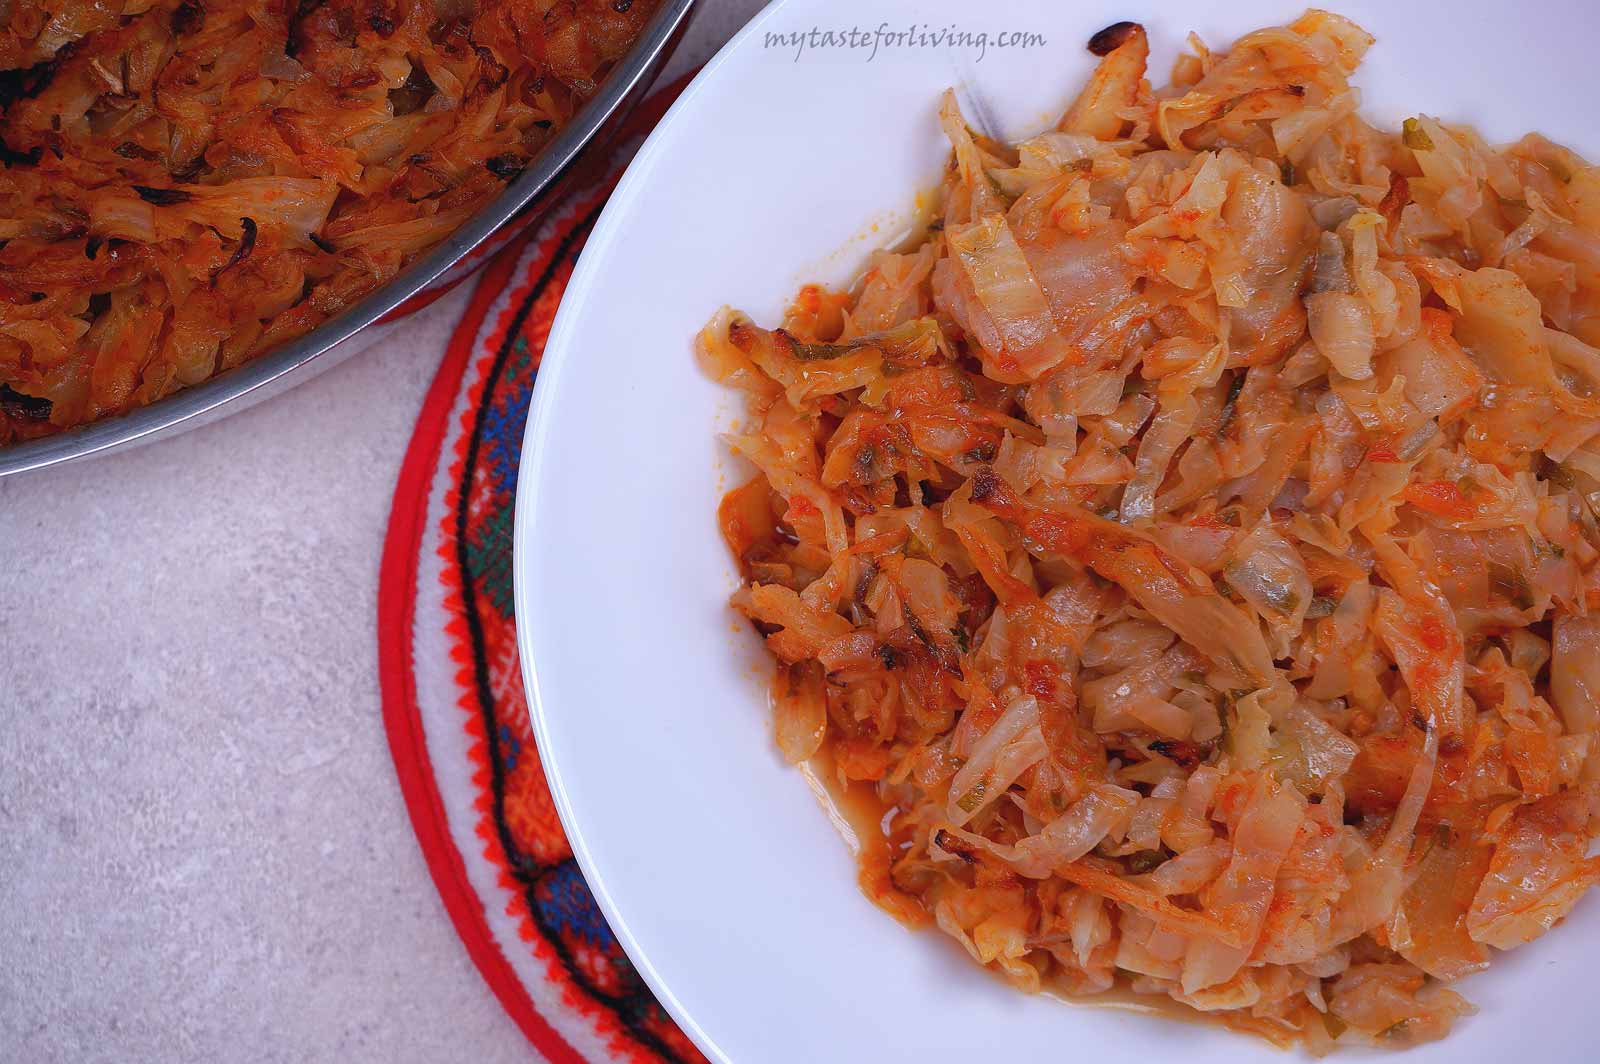 Today I'm sharing an easy and delicious vegan recipe for baked cabbage with tomatoes and celery which I really love!